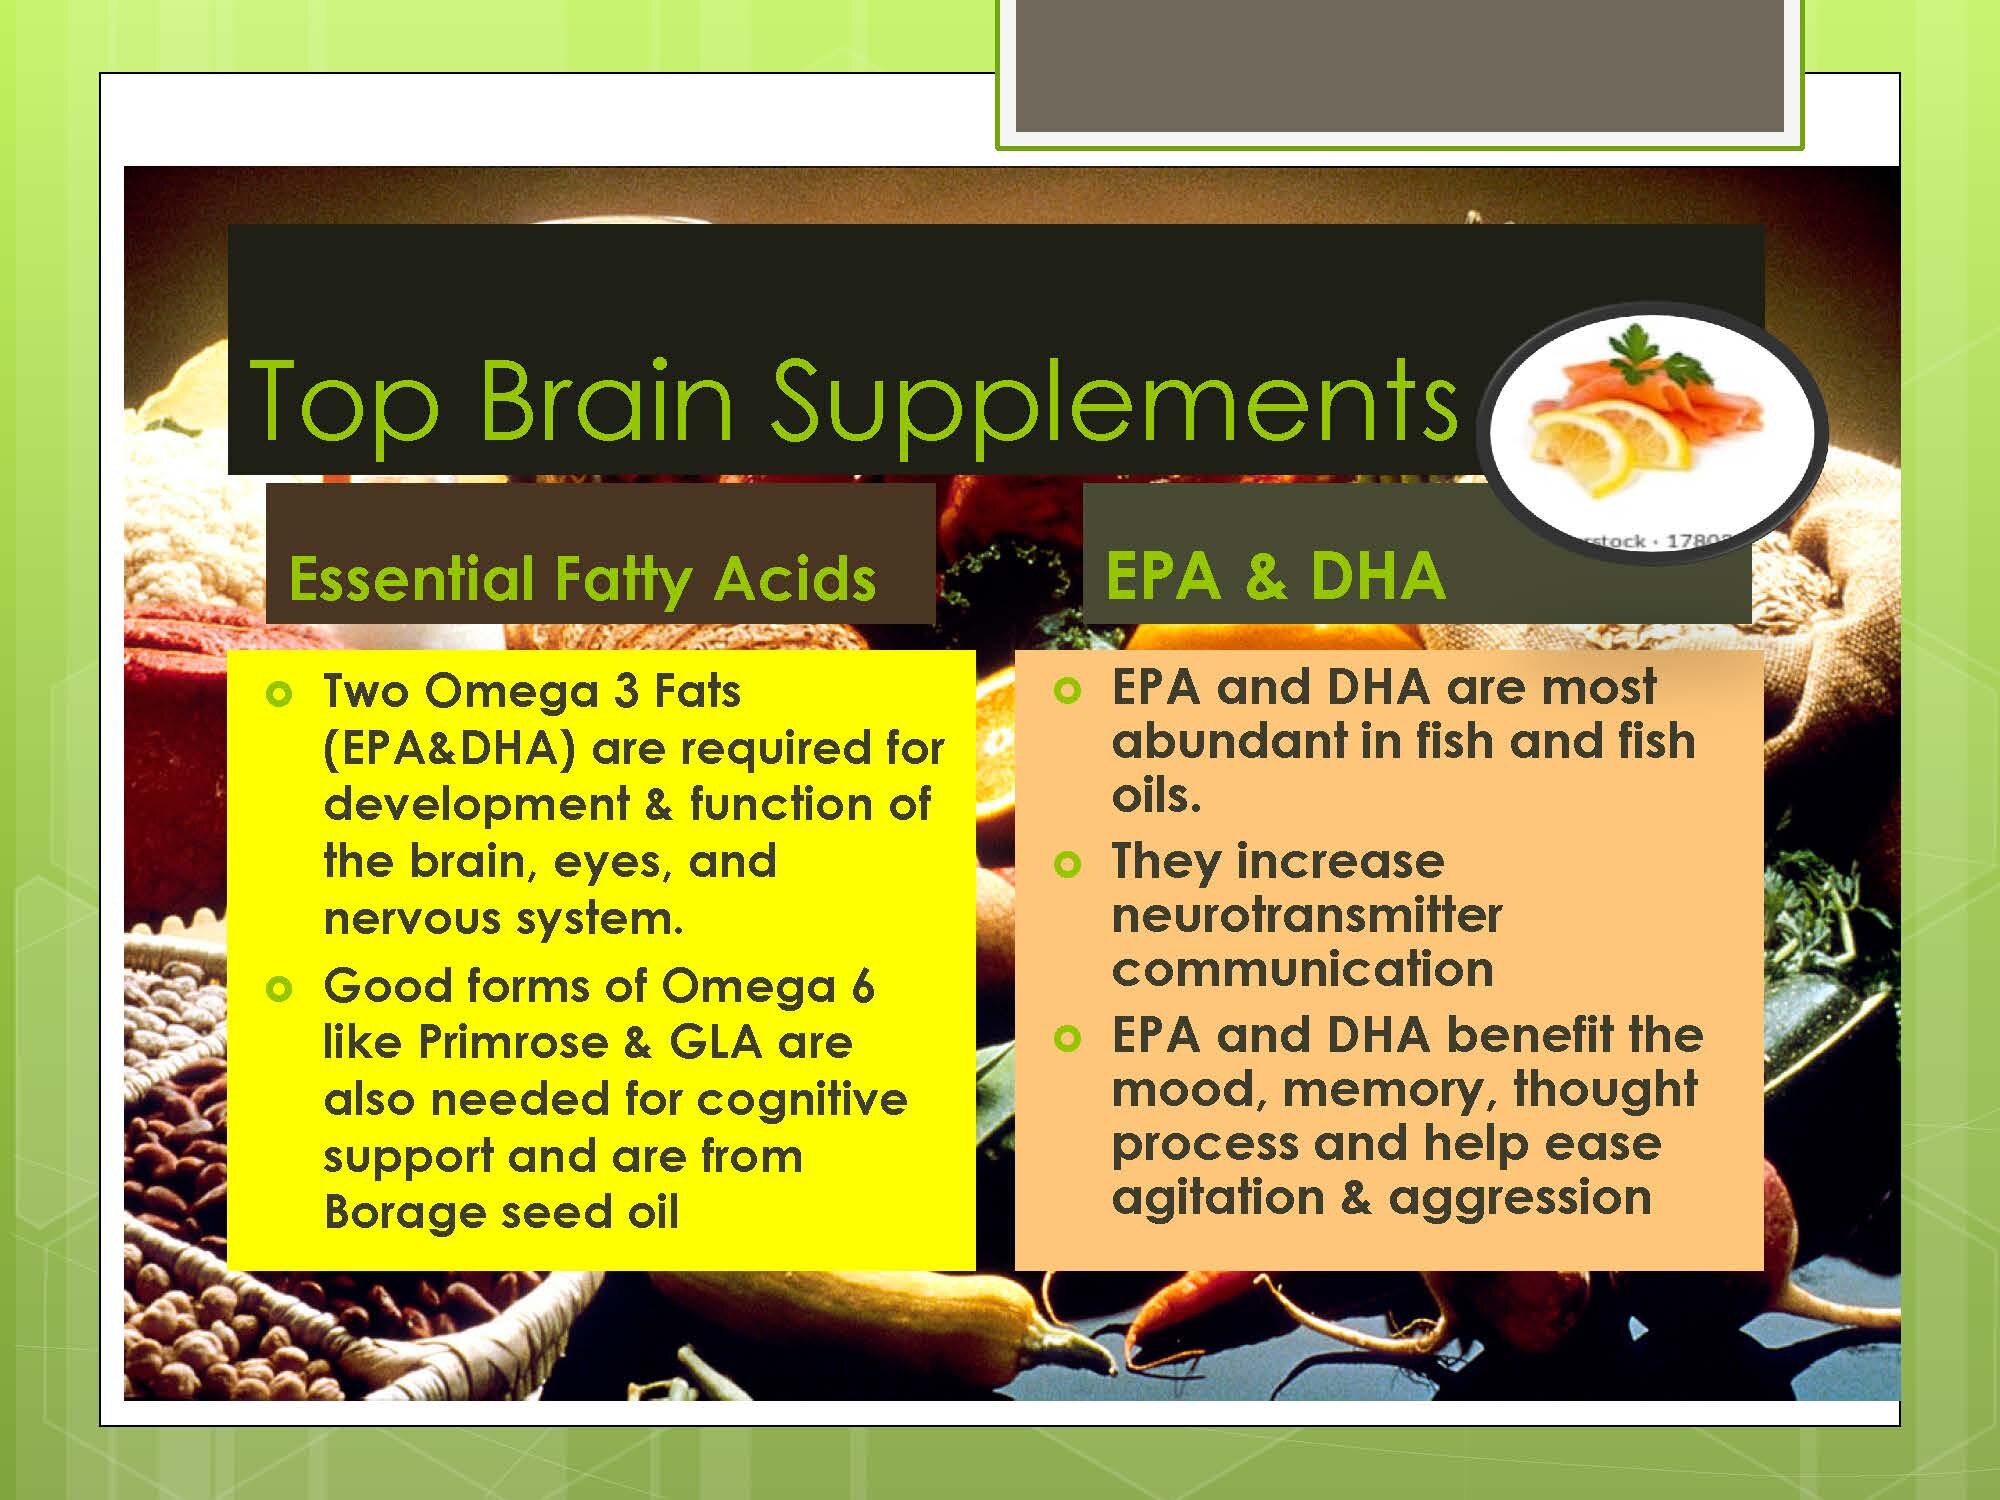 Healthy Nutrients for a Healthy BrainSS!_Page_04.jpg